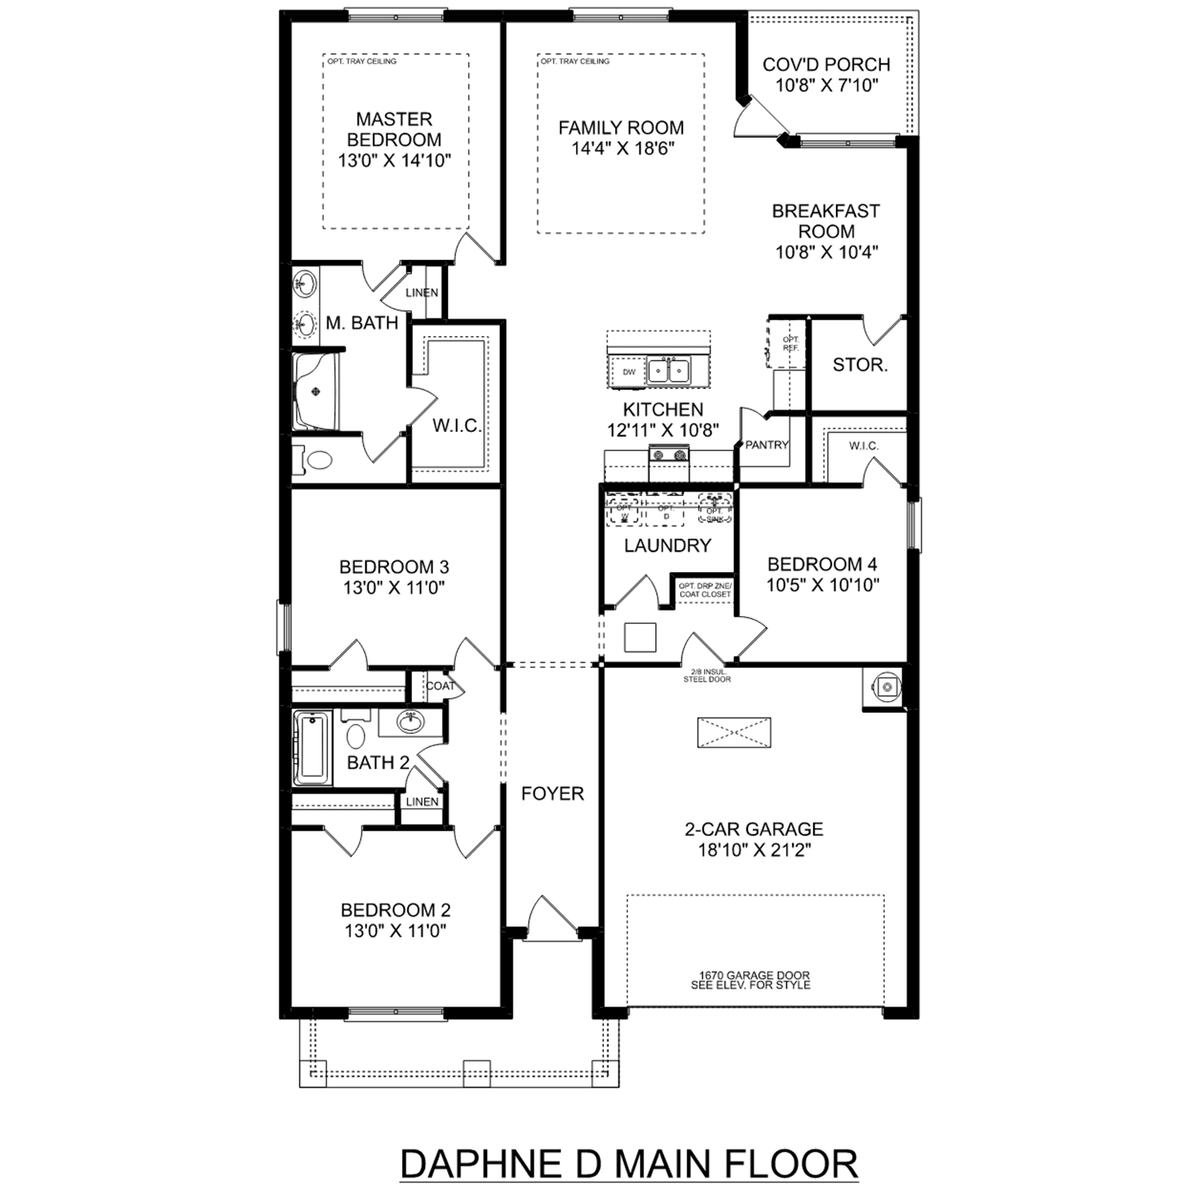 1 - The Daphne D floor plan layout for 208 Sunny Springs Court in Davidson Homes' Flint Meadows community.